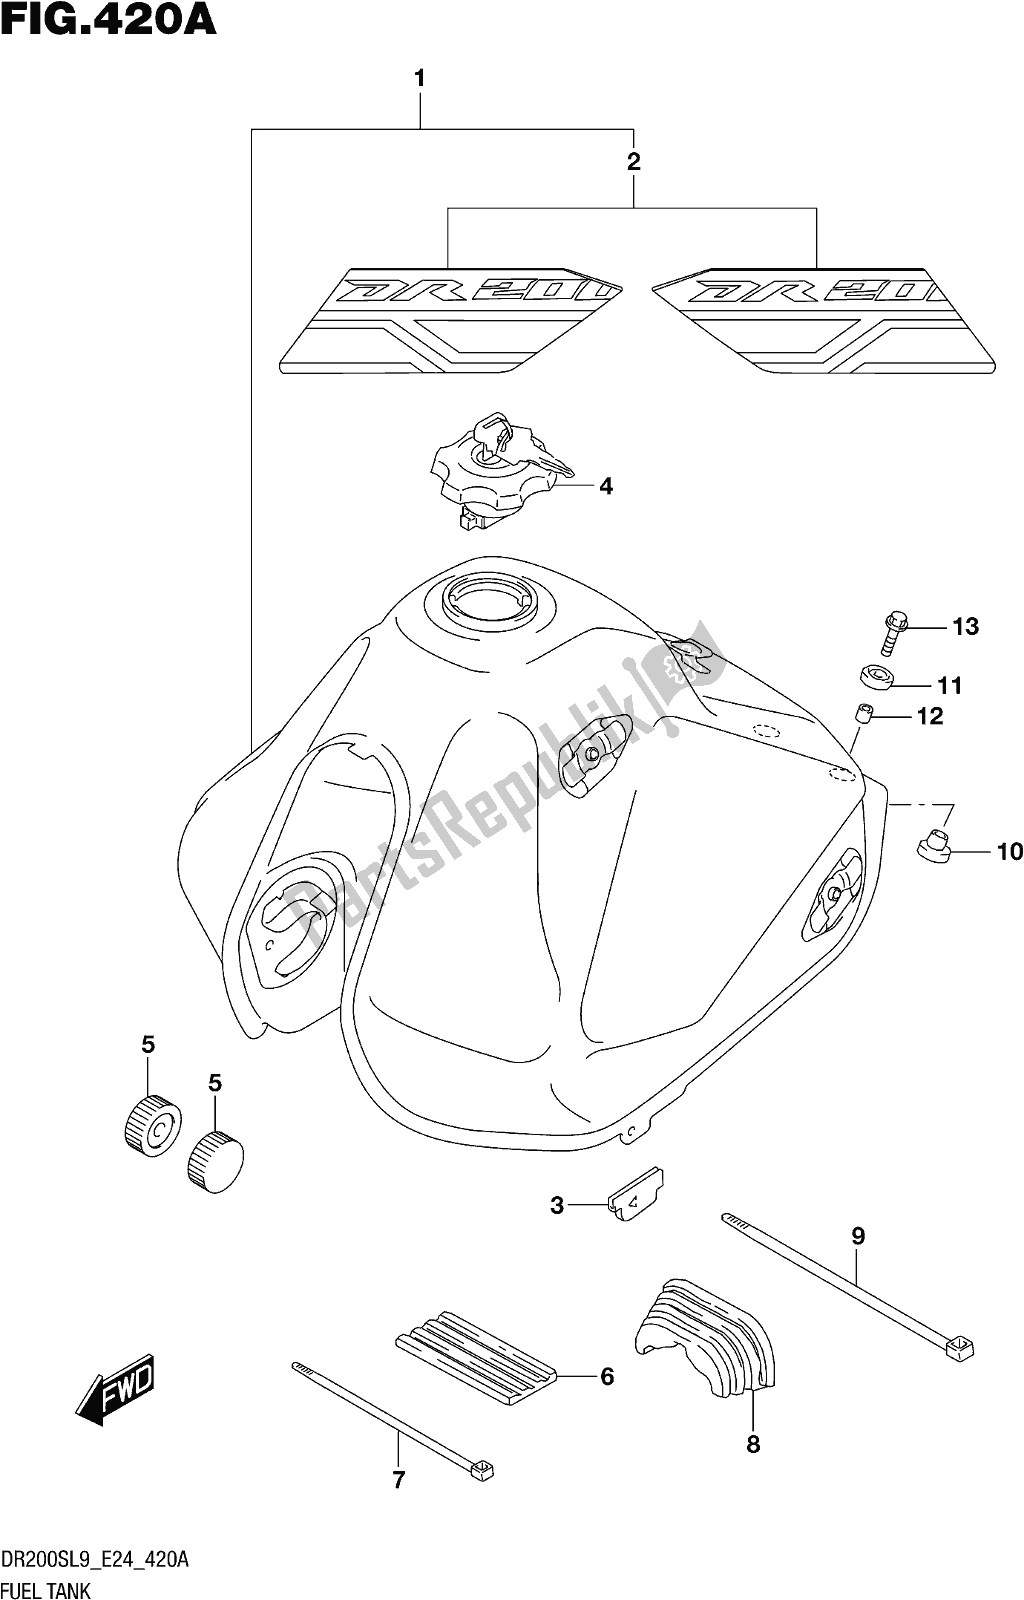 All parts for the Fig. 420a Fuel Tank of the Suzuki DR 200S 2019